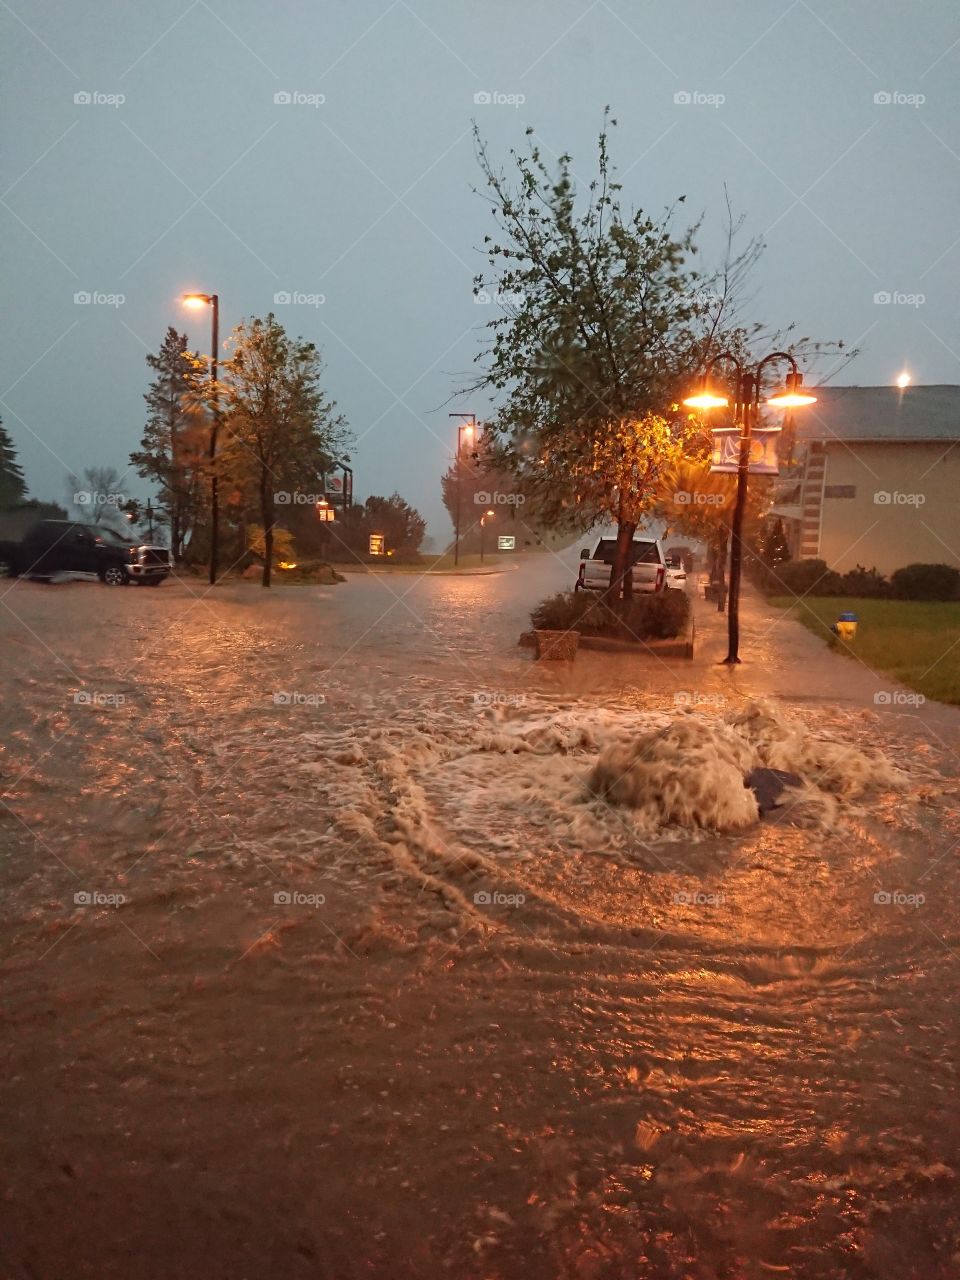 A flash flood during thunder storm days in Cold Lake